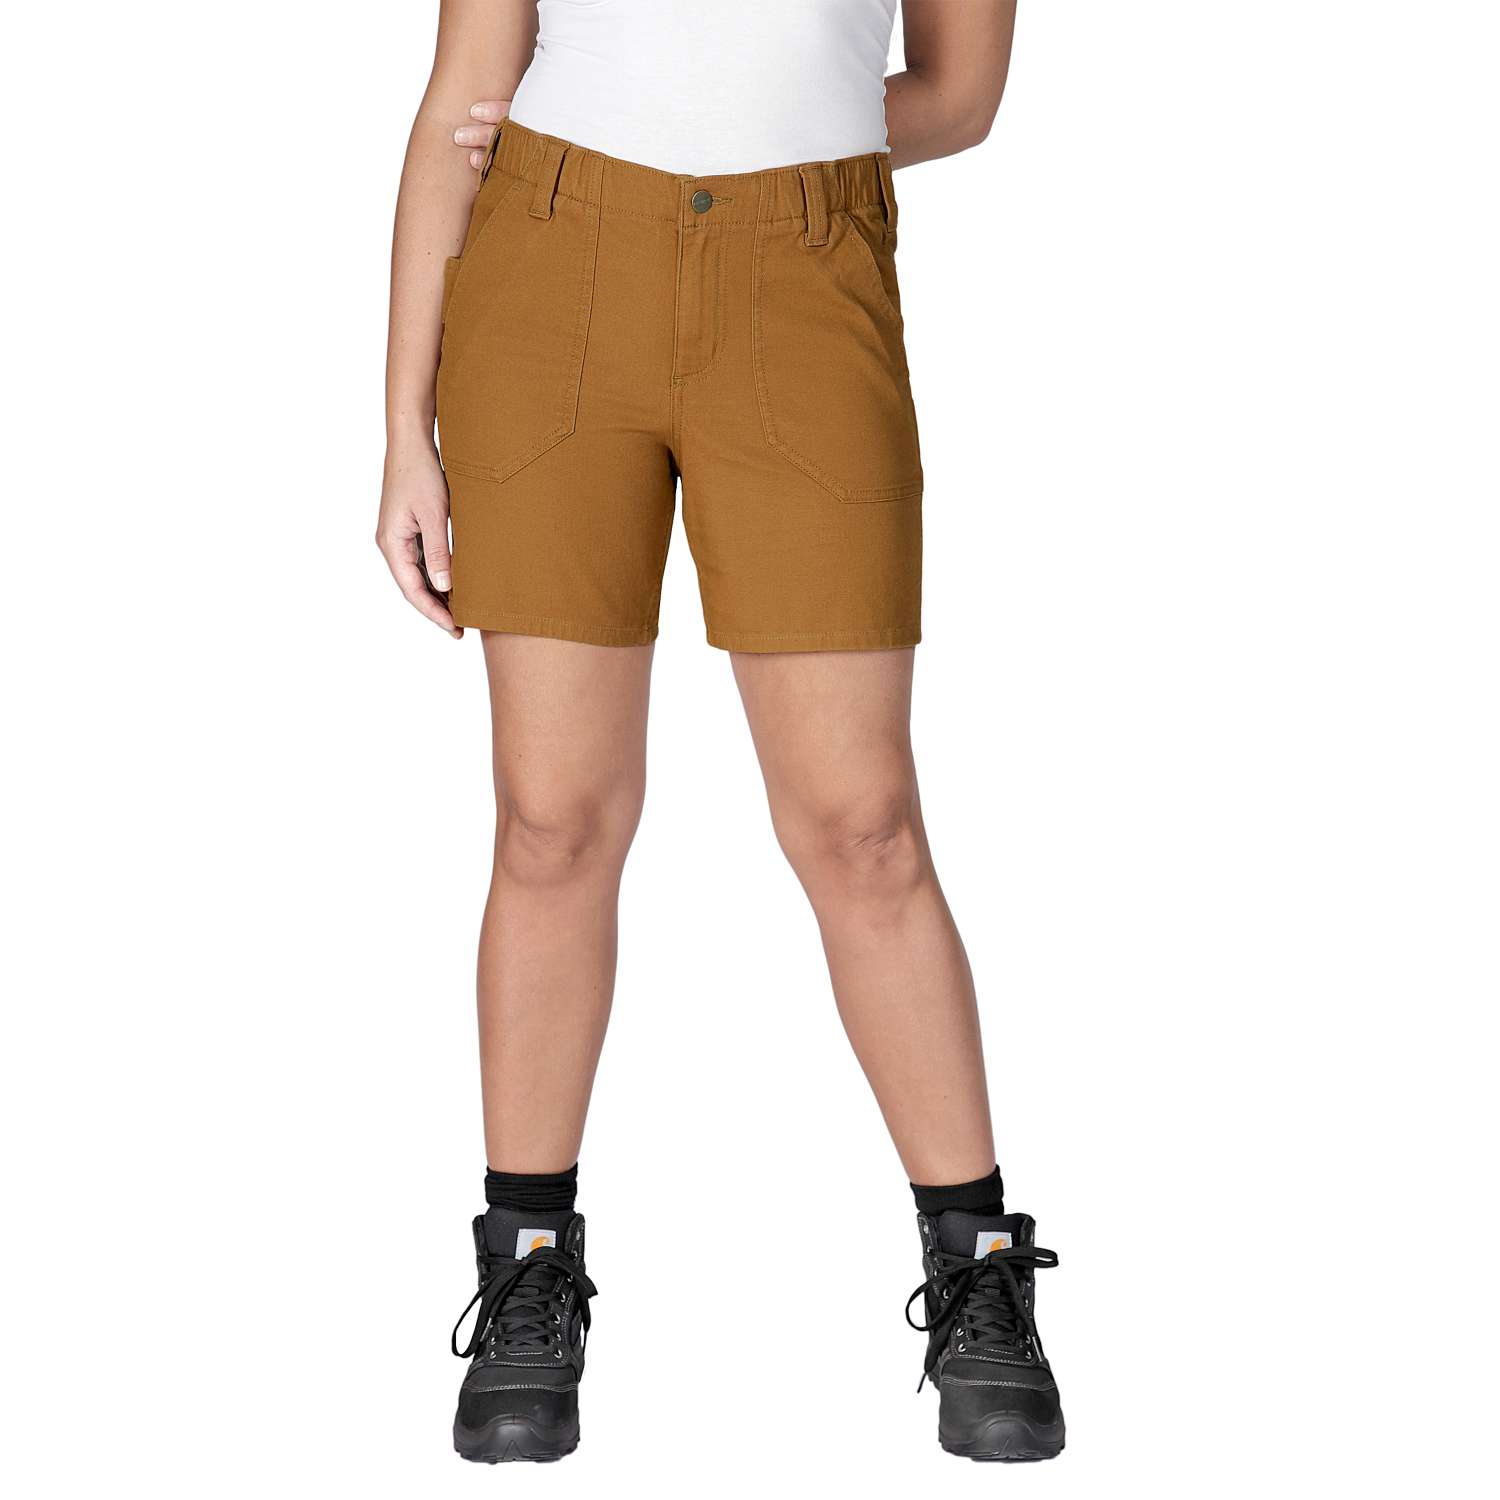 RELAXED_FIT_CANVAS_WORK_SHORT_8Y6M0XRCkR